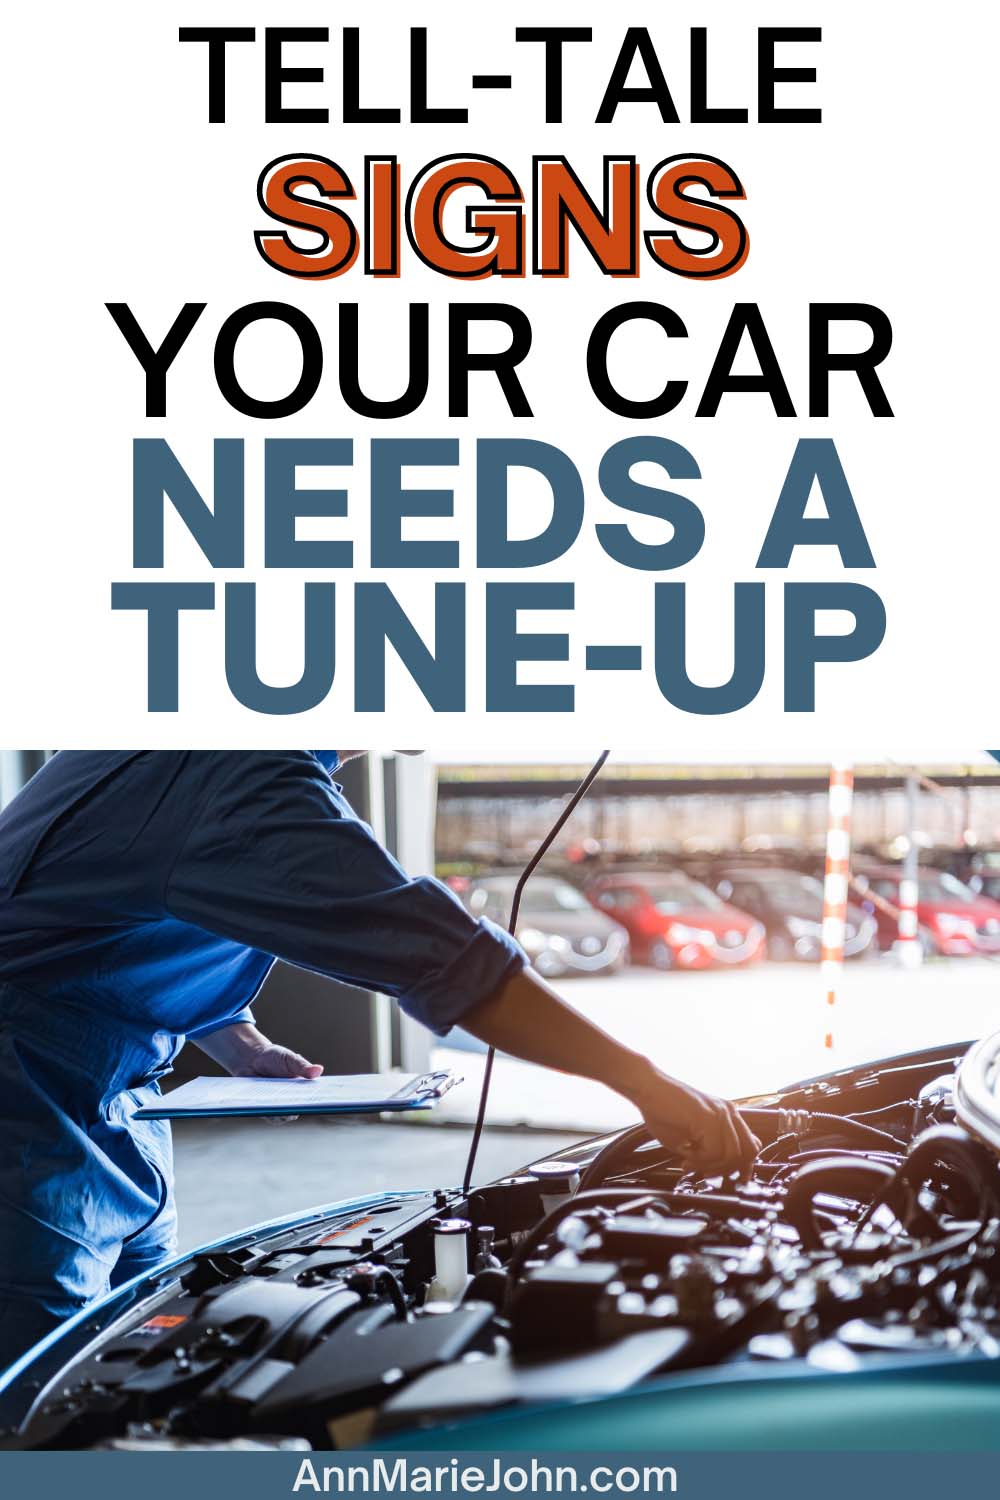 Tell-Tale Signs Your Car Needs a Tune-Up